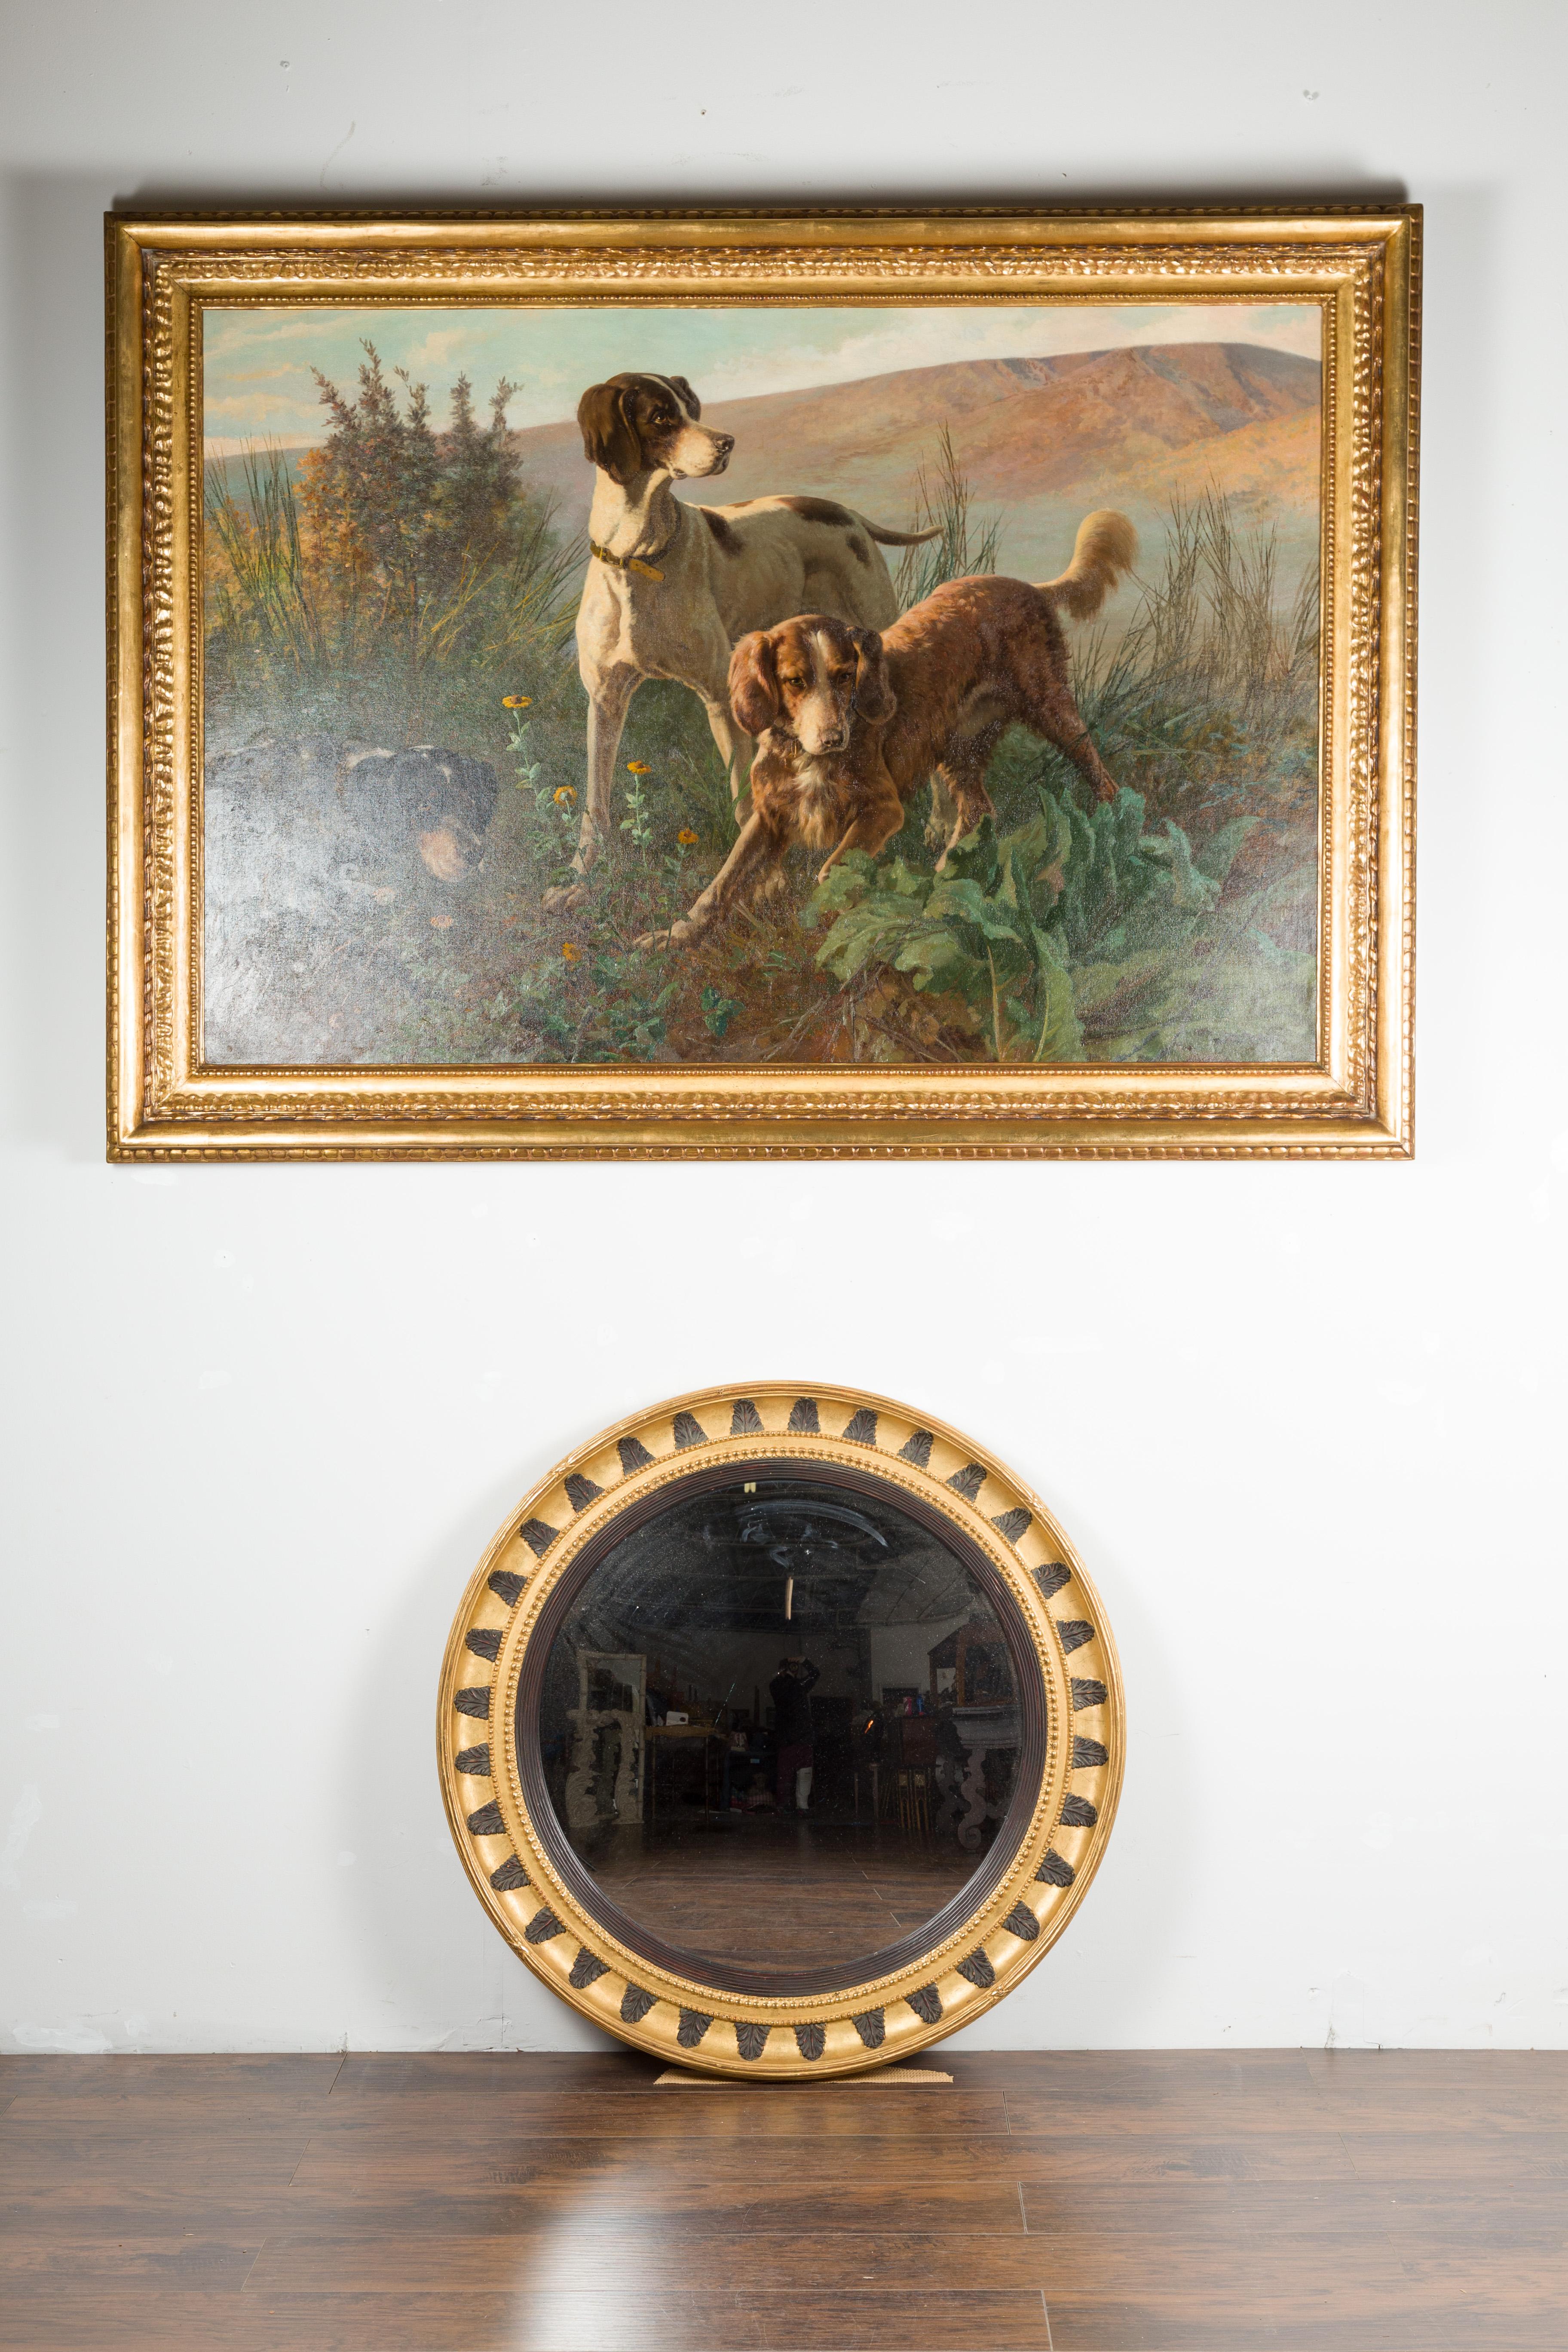 An English bullseye convex gilded mirror from the mid-20th century, with ebonized acanthus leaves and beads. Created in England during the midcentury period, this bullseye mirror features a circular gilded frame, perfectly adorned with carved and